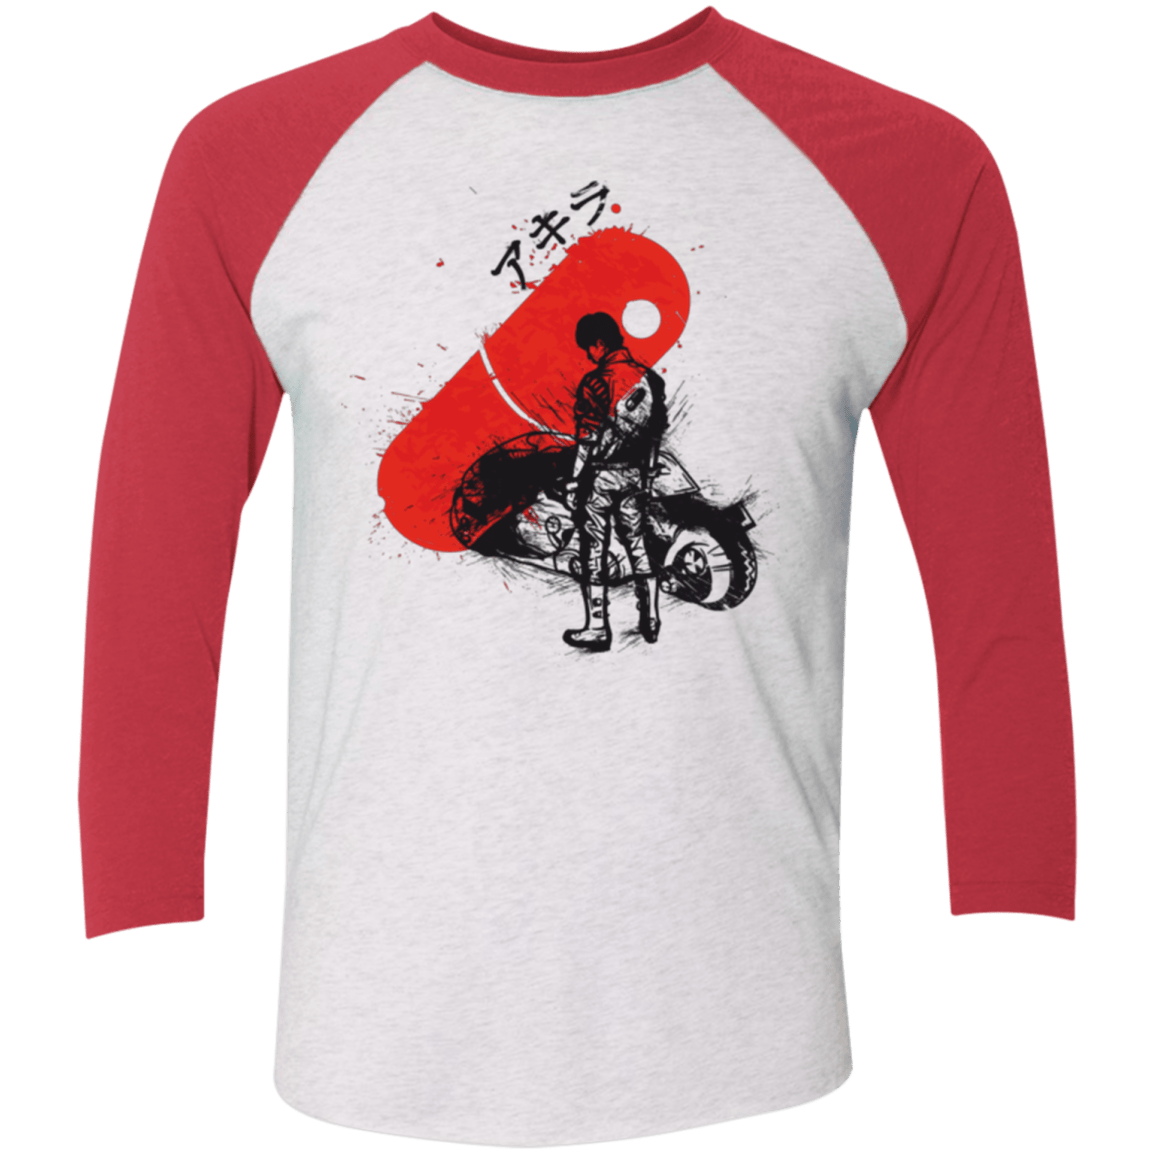 T-Shirts Heather White/Vintage Red / X-Small RED SUN AKIRA Men's Triblend 3/4 Sleeve